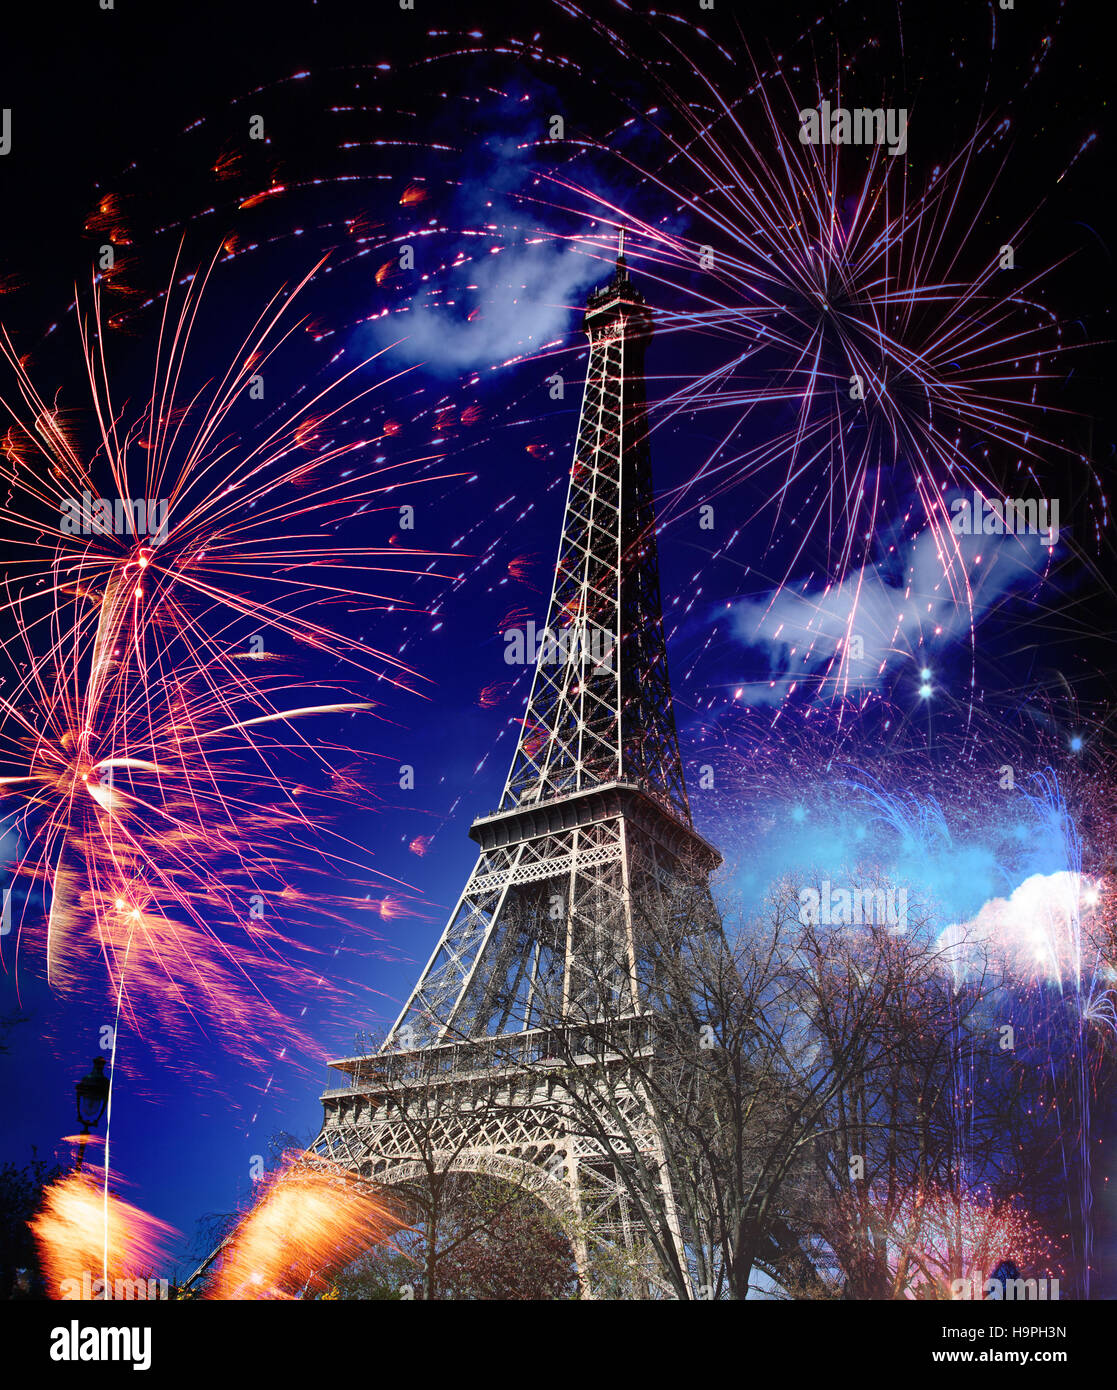 Eiffel tower with fireworks, celebration of the New Year in Paris, France Stock Photo